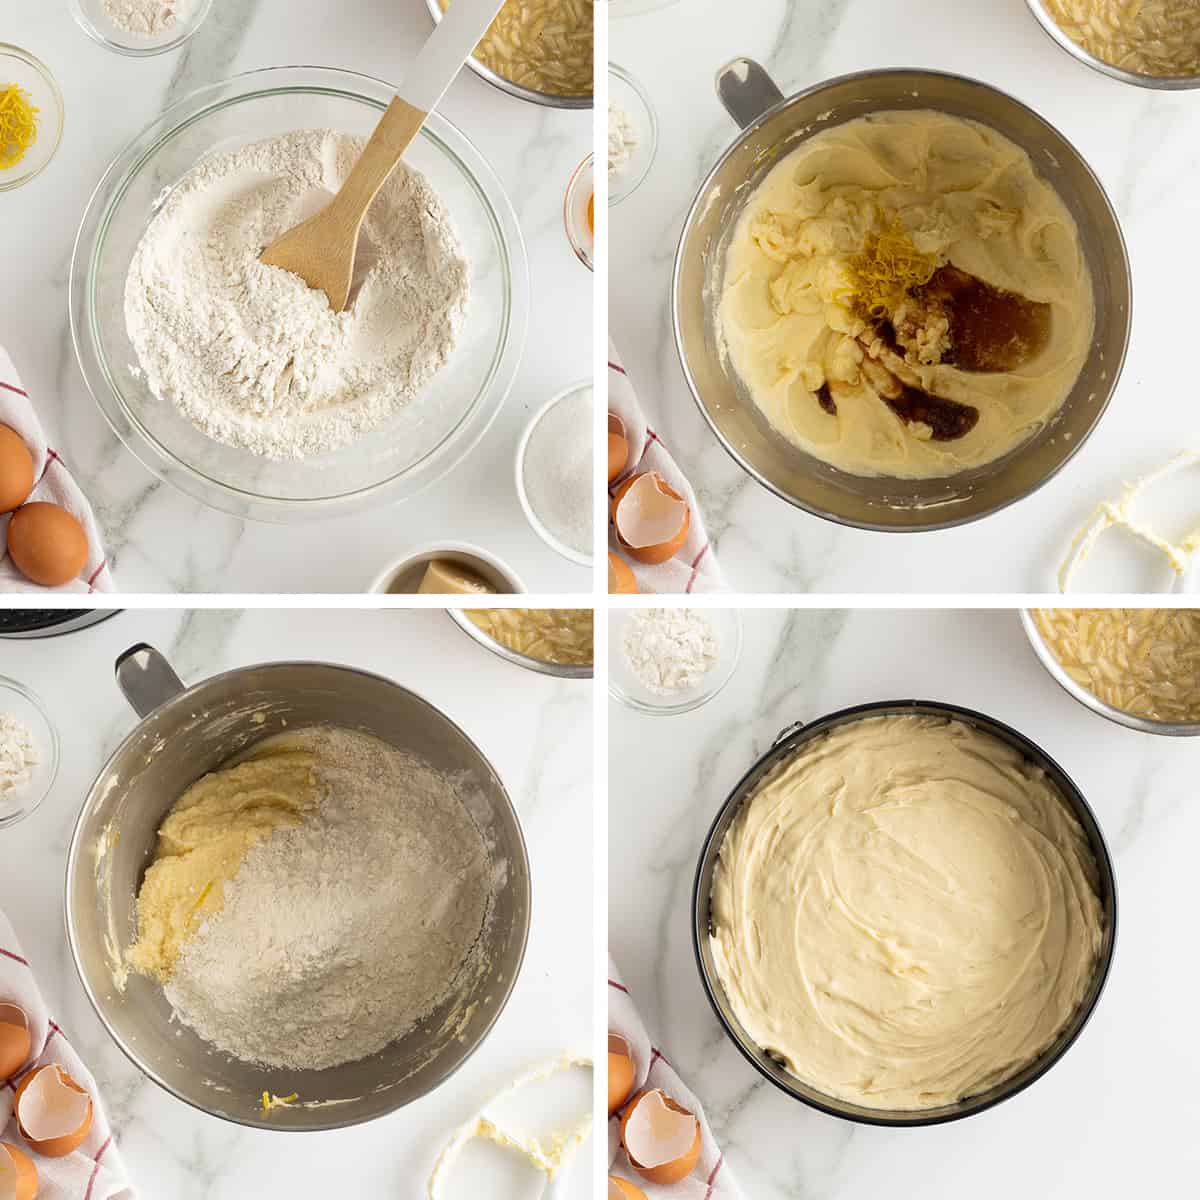 Four images of cake batter being mixed in a bowl and then transferred to a springform pan.